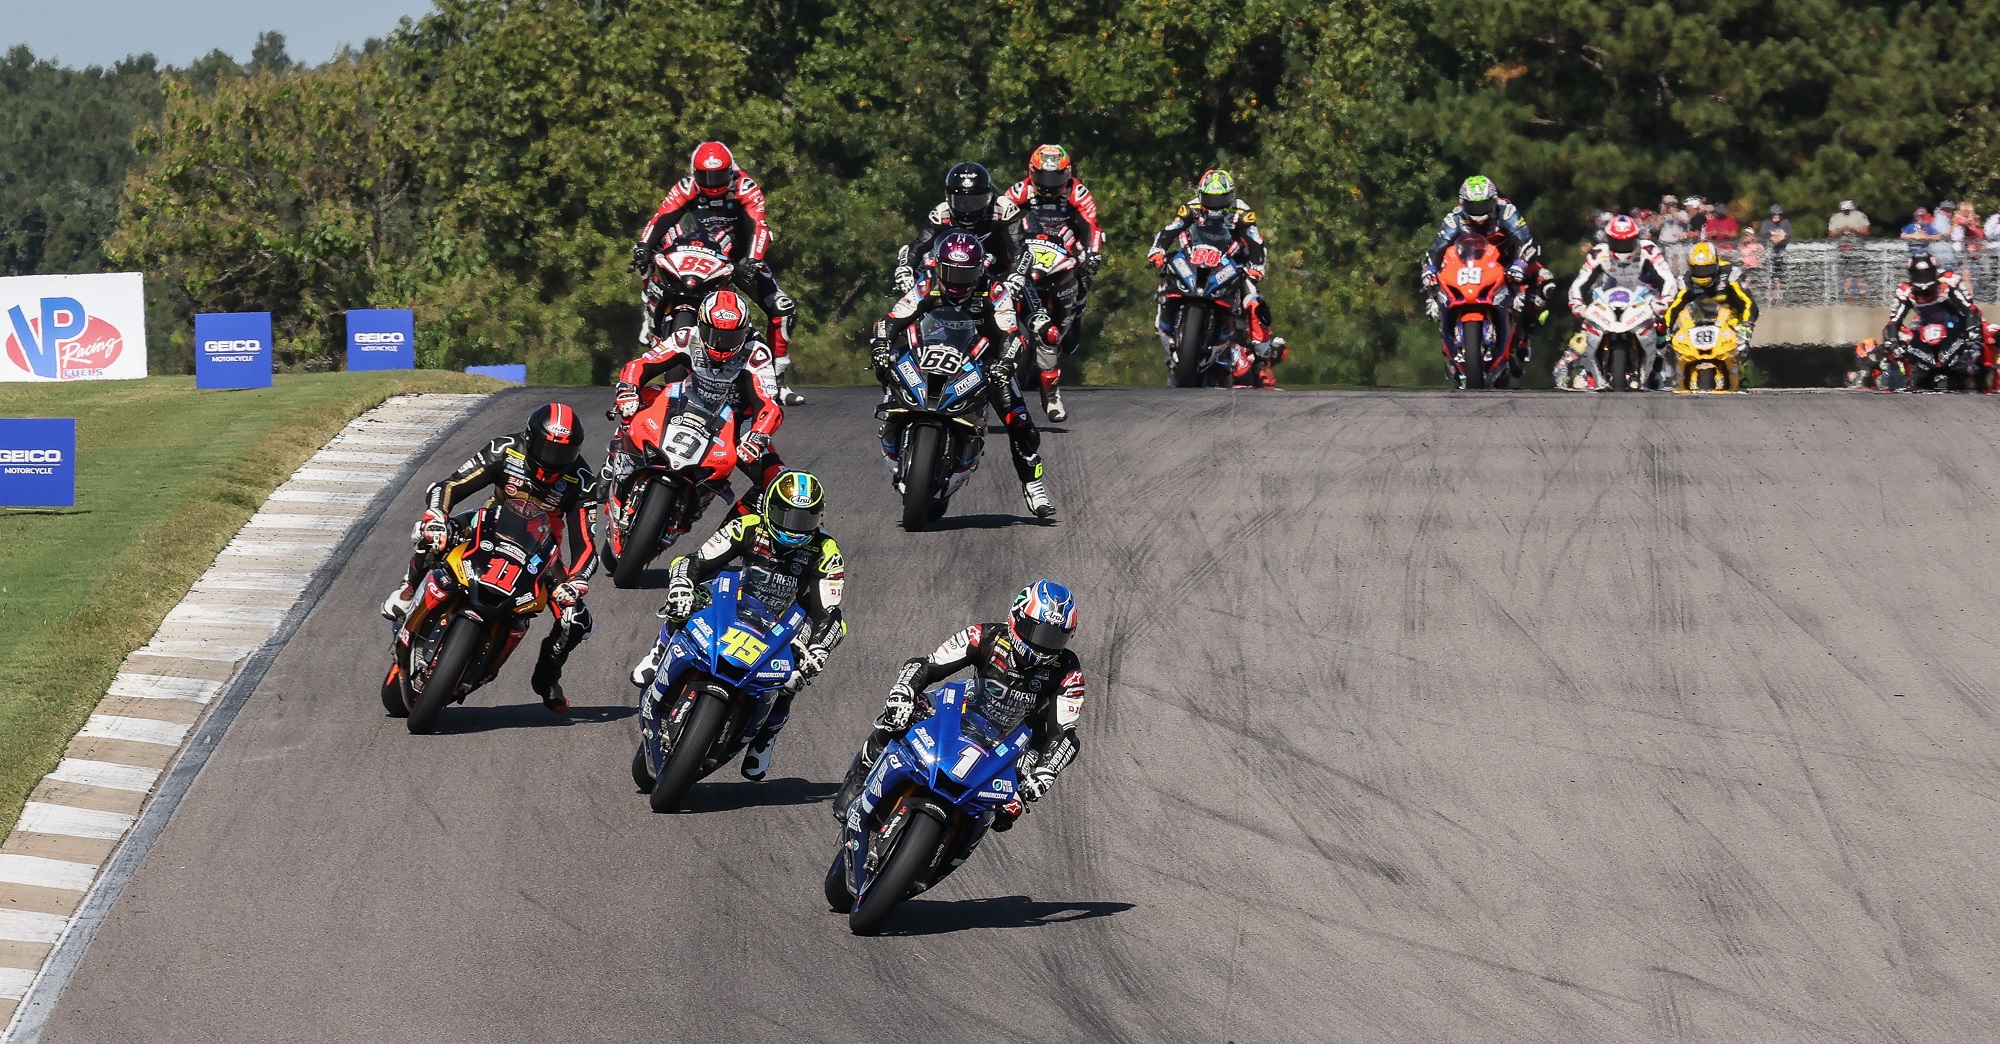 The Superbike field in close formation at the beginning of Saturday's race